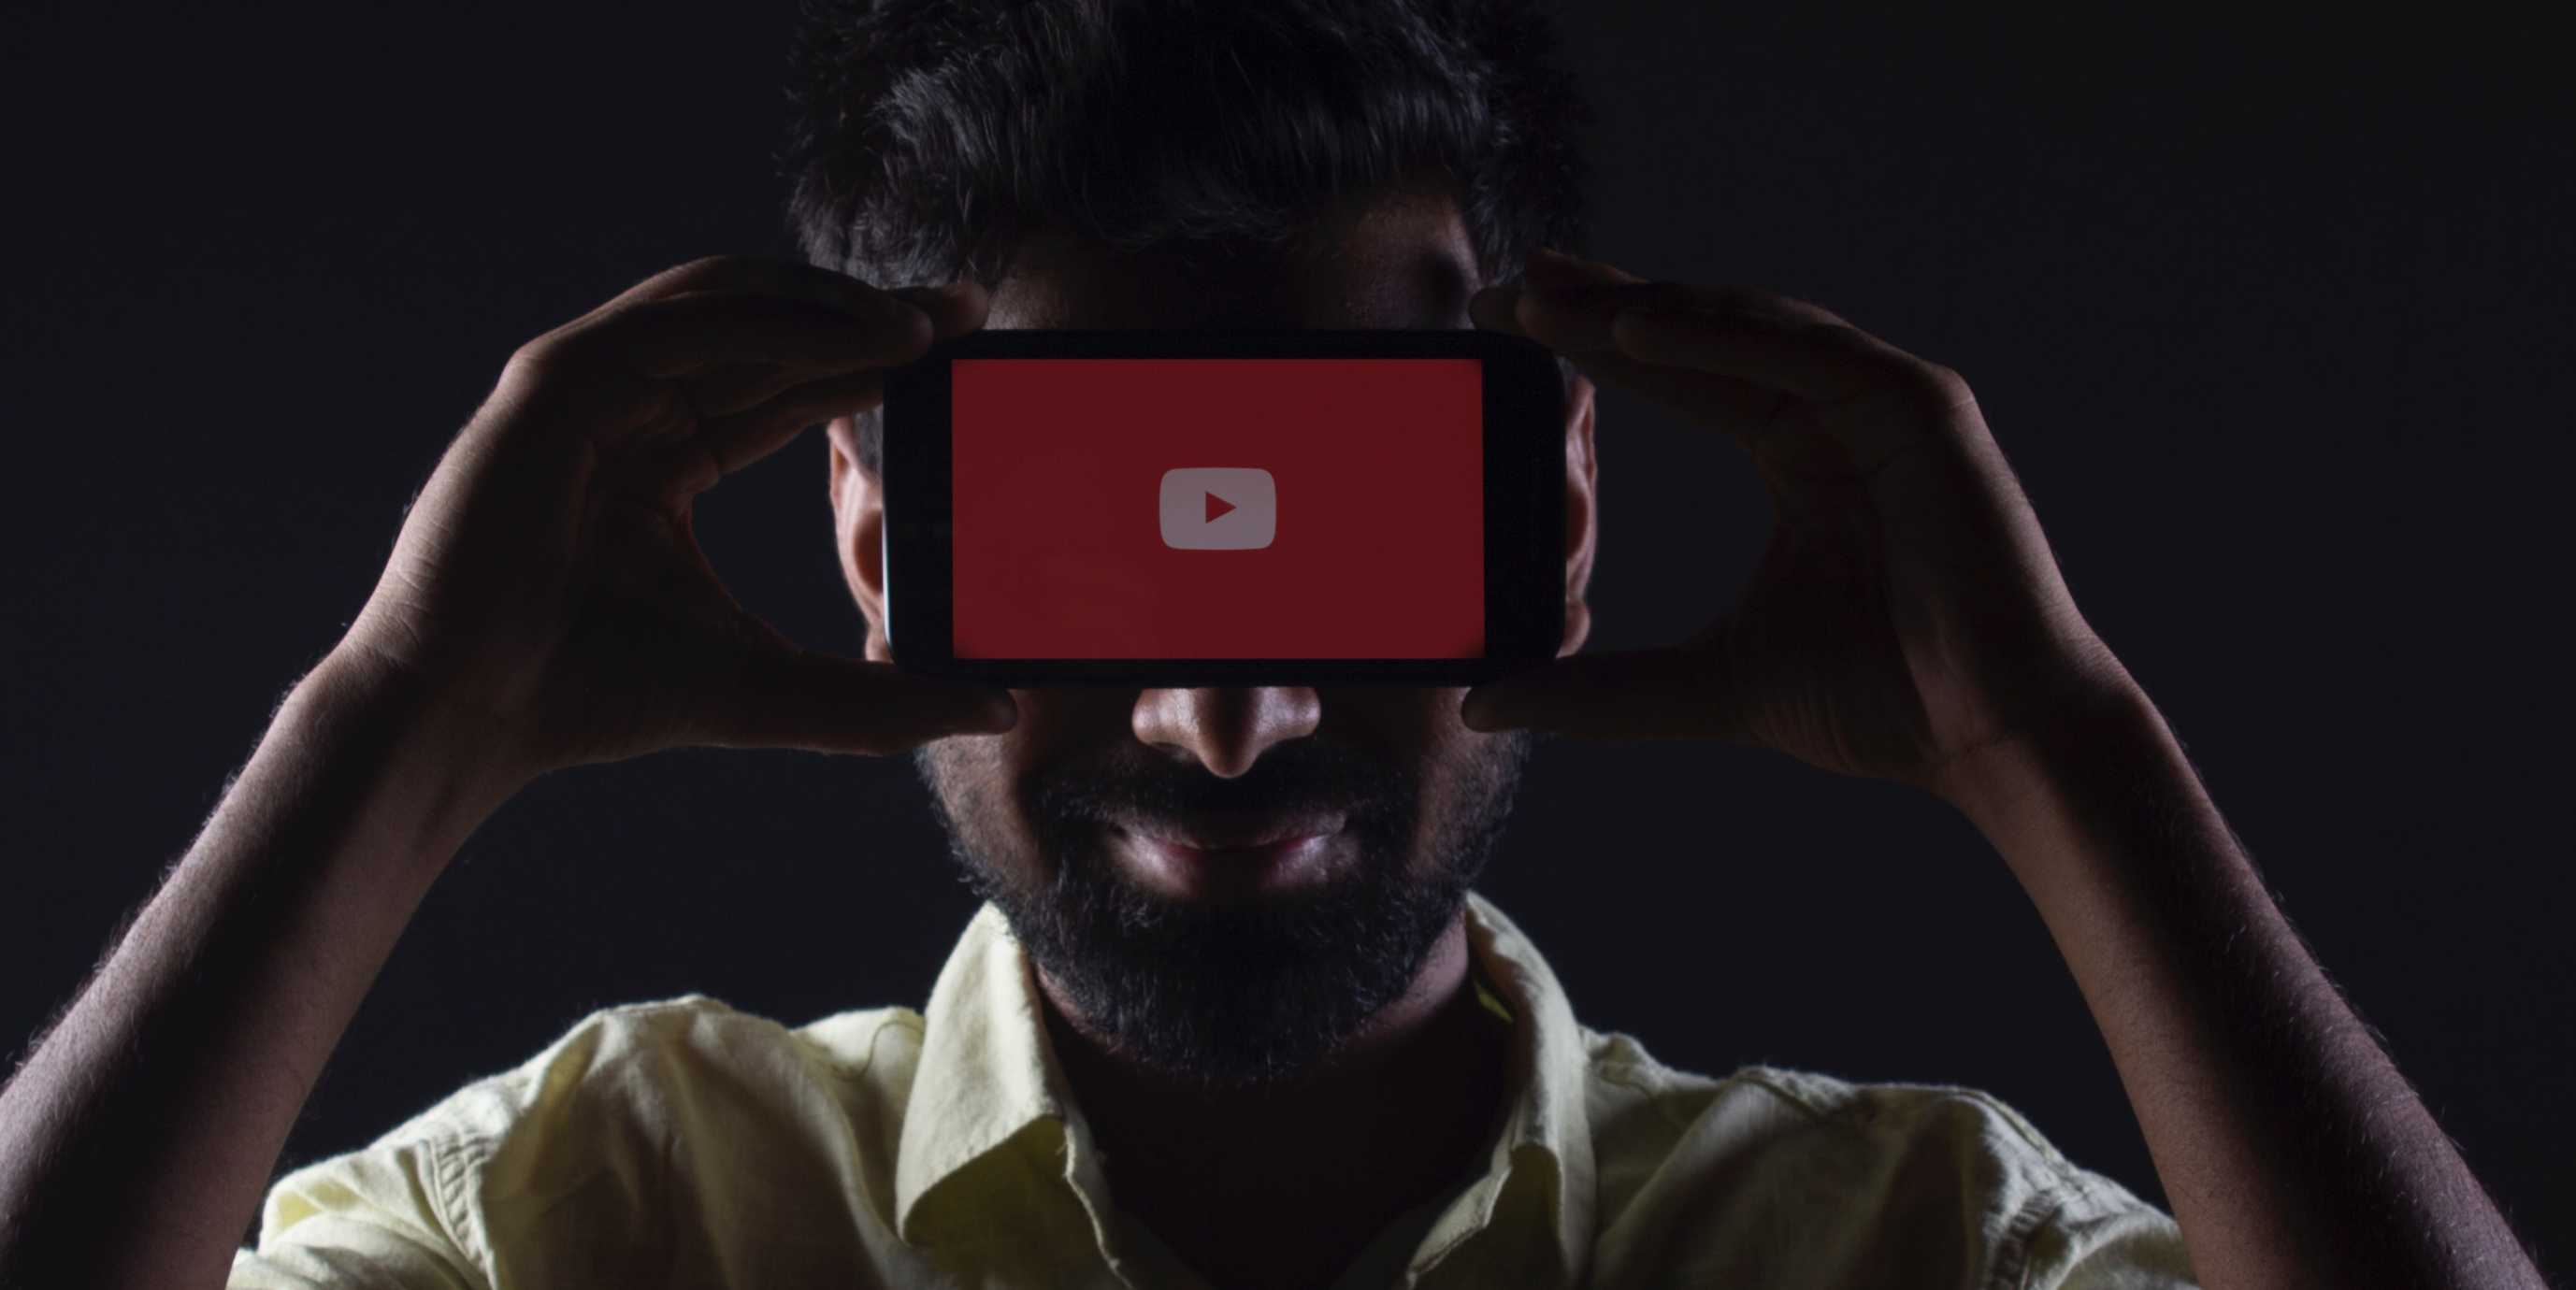 Top 15 Best Youtube Channel in india, Most Subscribed Youtube Channels